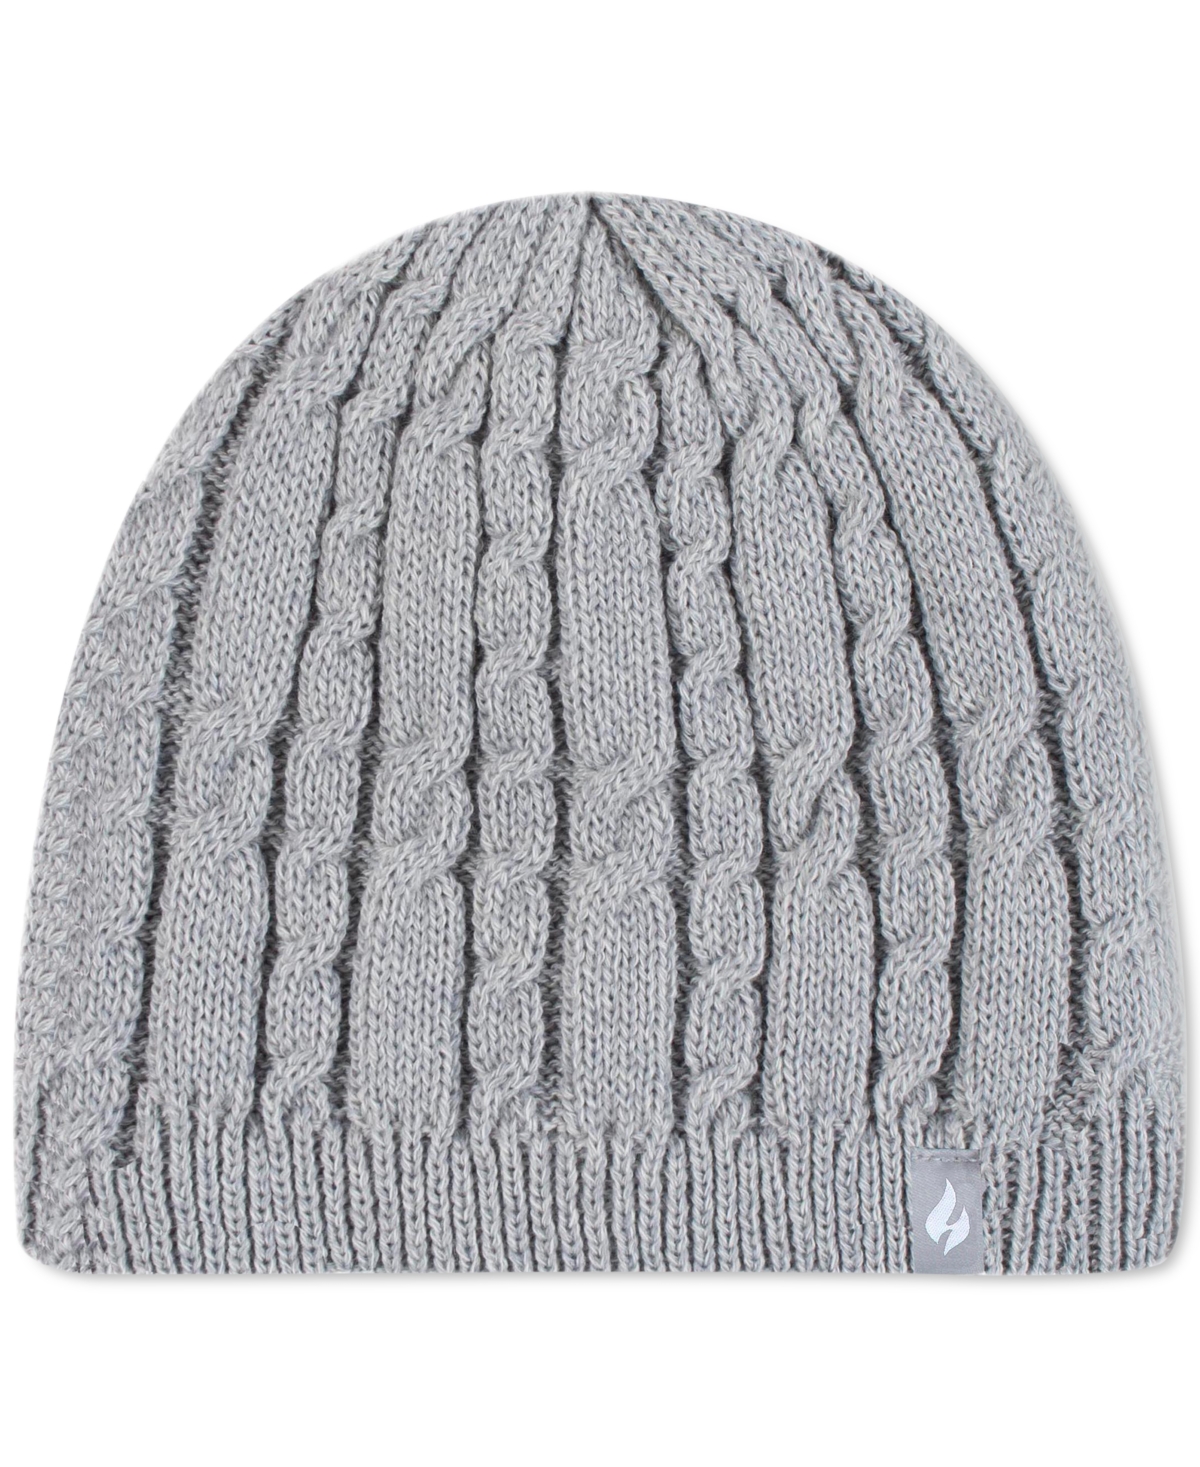 Women's Alesund Cable-Knit Hat - Cloud Grey